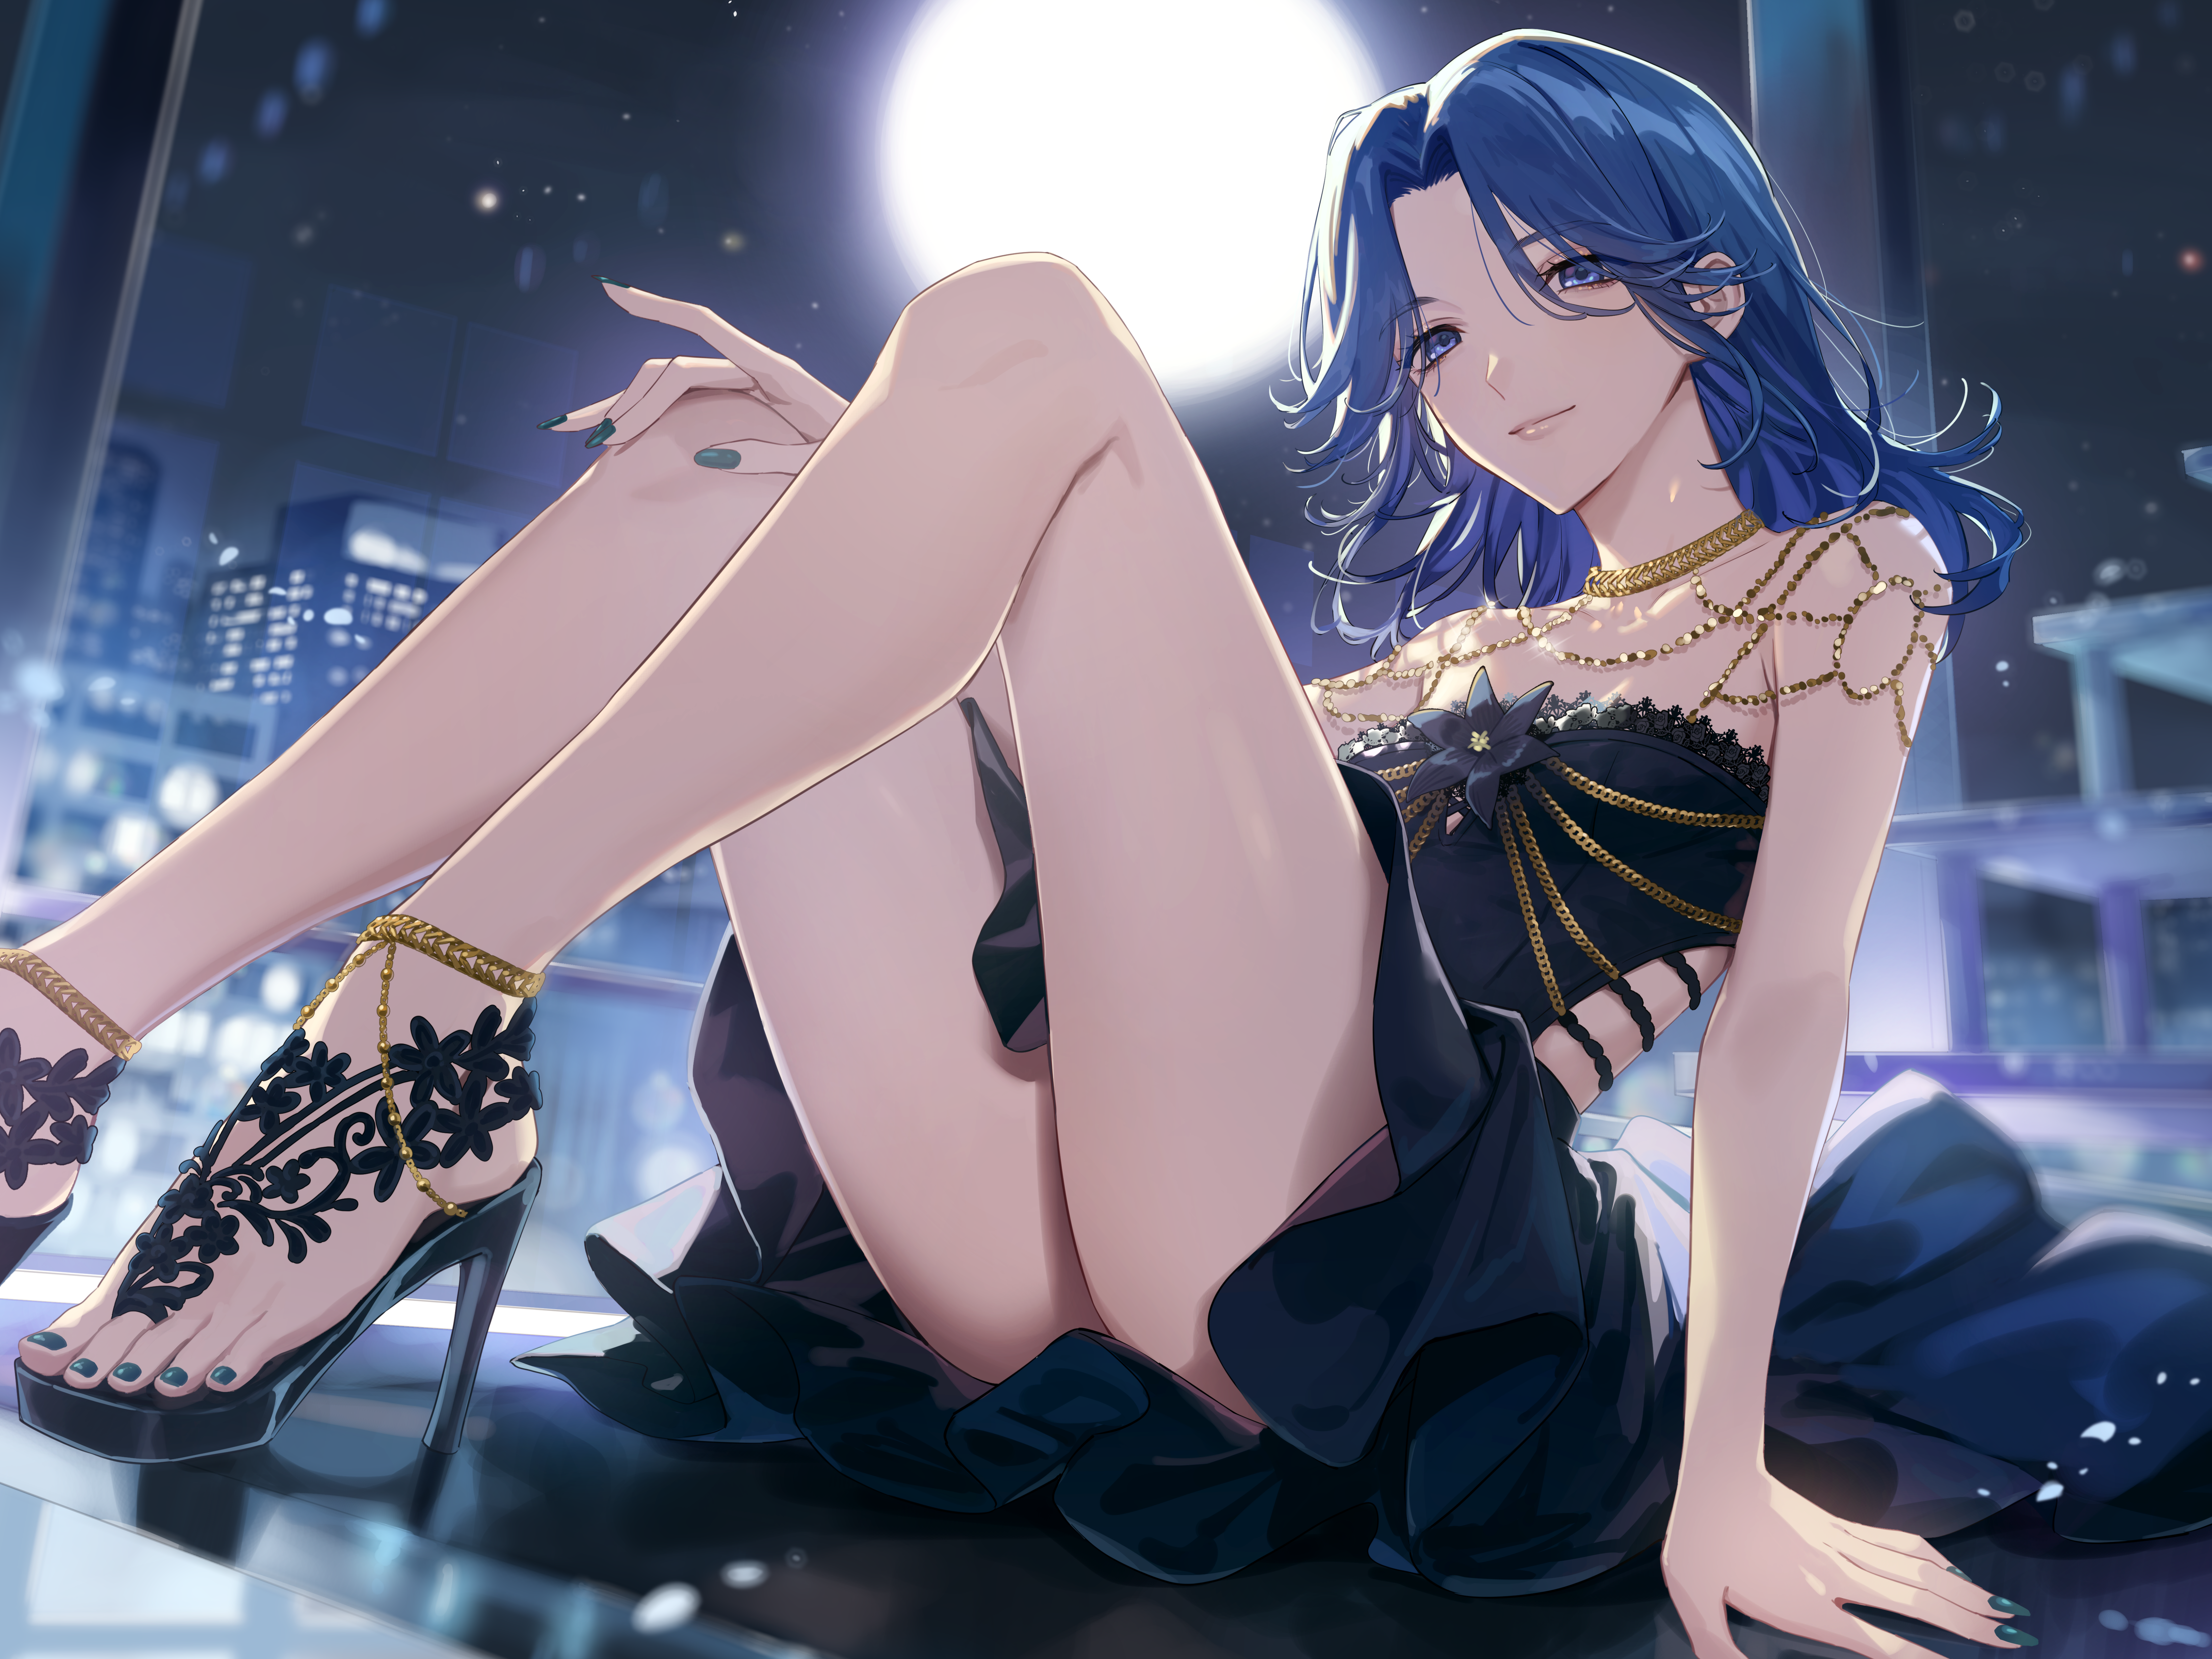 Anime 6552x4914 Kotarou looking at viewer black dress closed mouth blue dress dark blue hair blue hair nail polish full moon cityscape long hair high heels black heels window arm support jewelry smiling black nails necklace sitting night Moon thighs sky heels dress legs toes sleeveless Gold-trimmed clothes anime anime girls